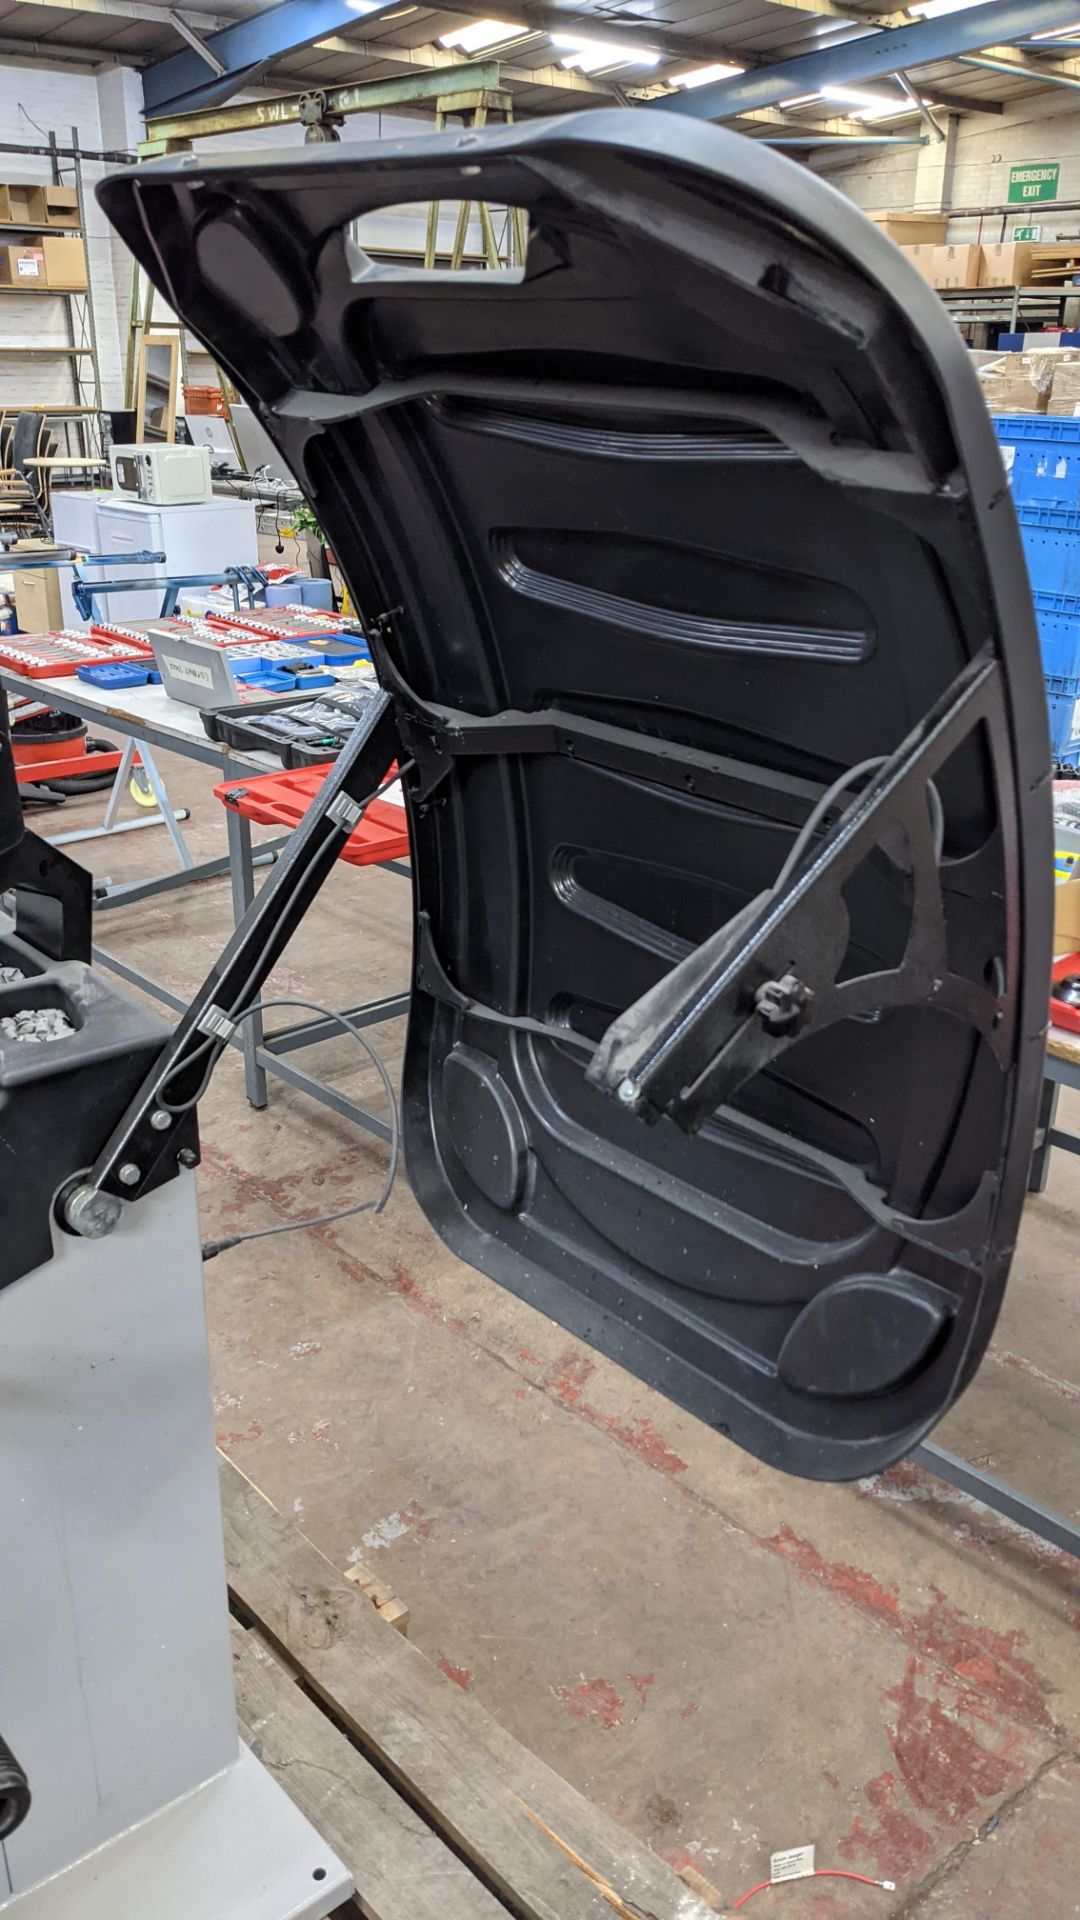 2019 Atlas Platinum type PWB90 3D wheel balancing system with TFT screen including wide variety of a - Image 15 of 21